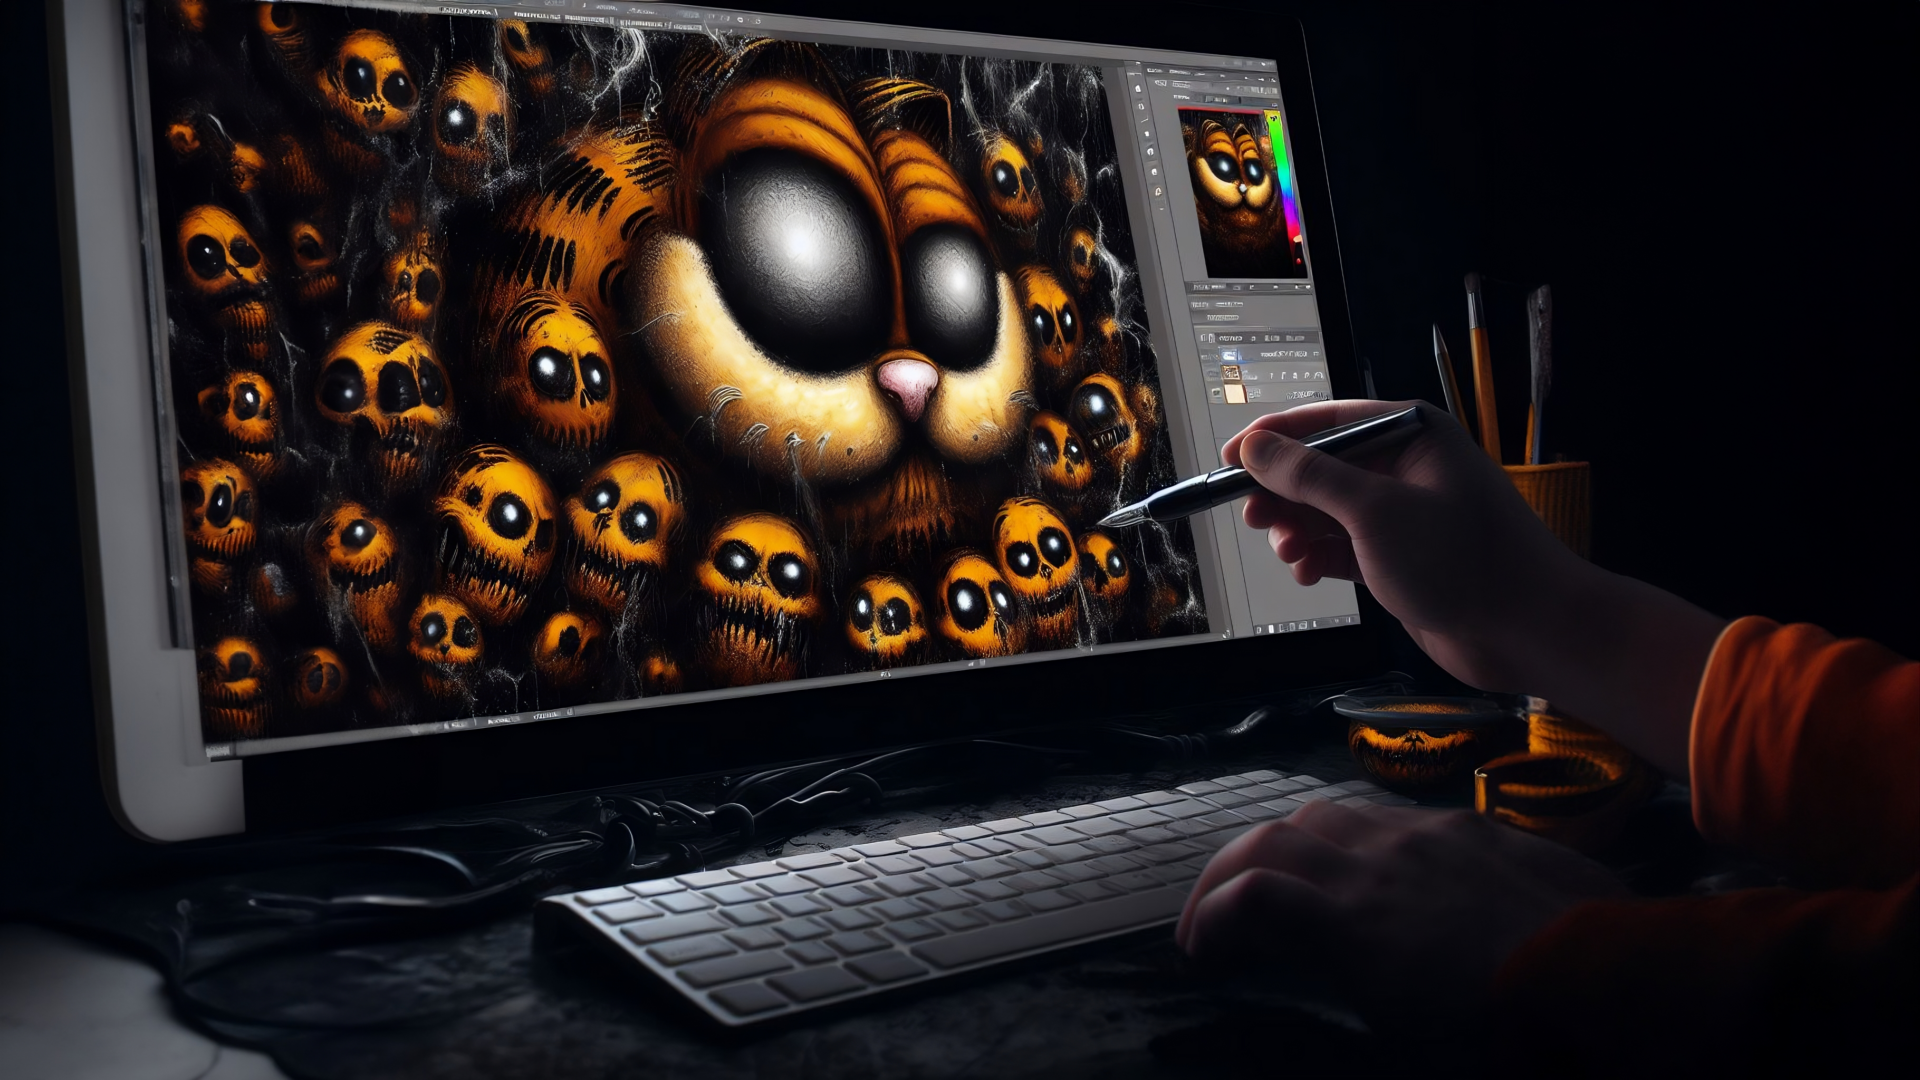 What the Internet did to Garfield